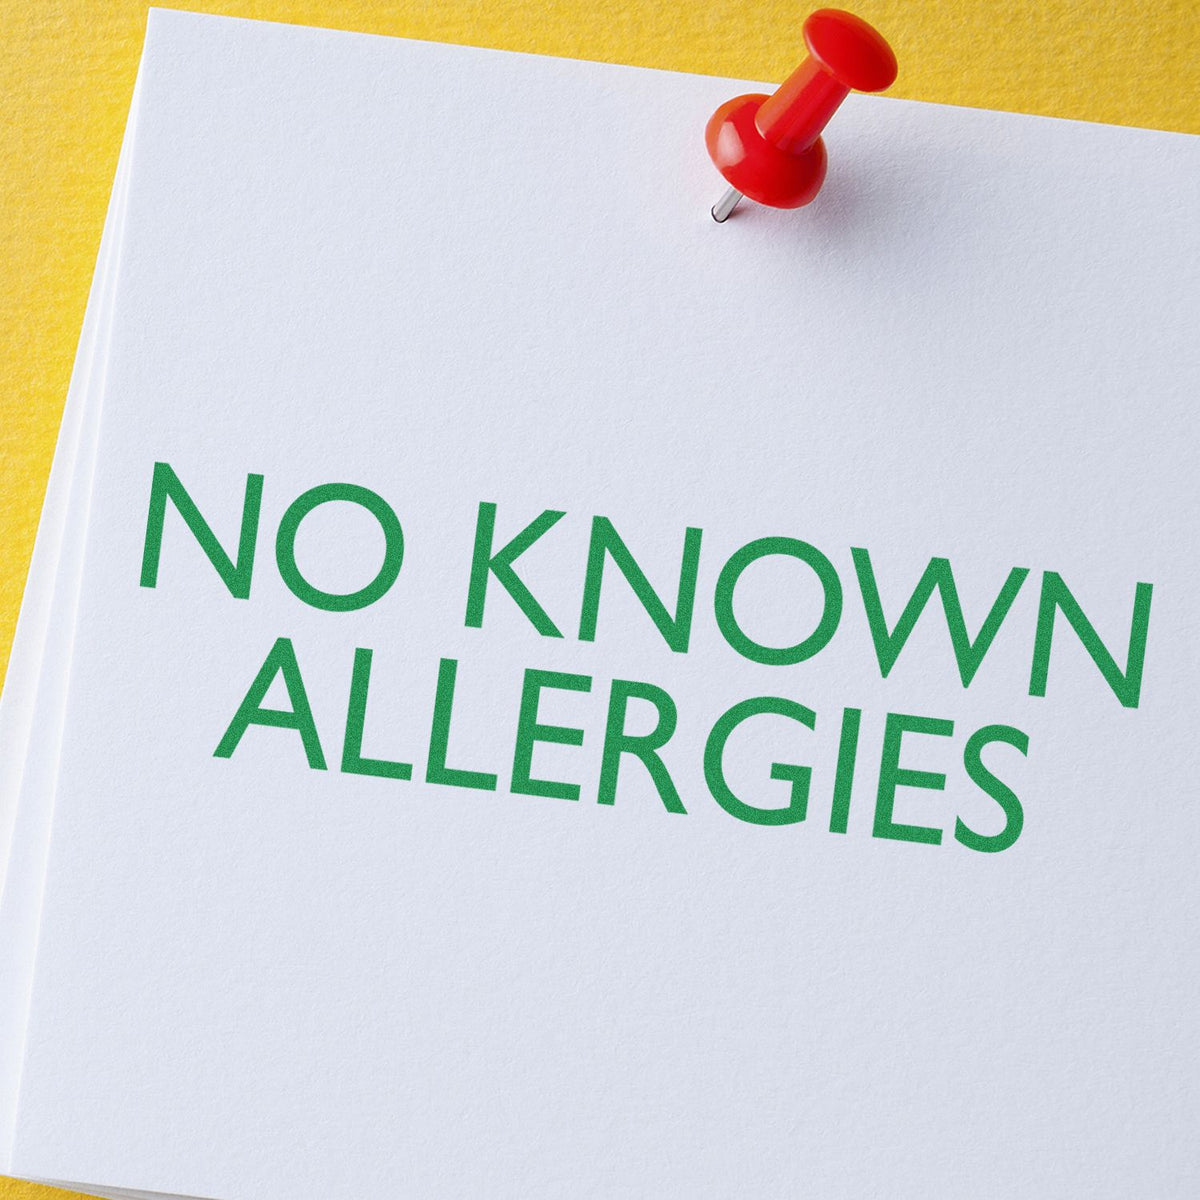 No Known Allergies Rubber Stamp In Use